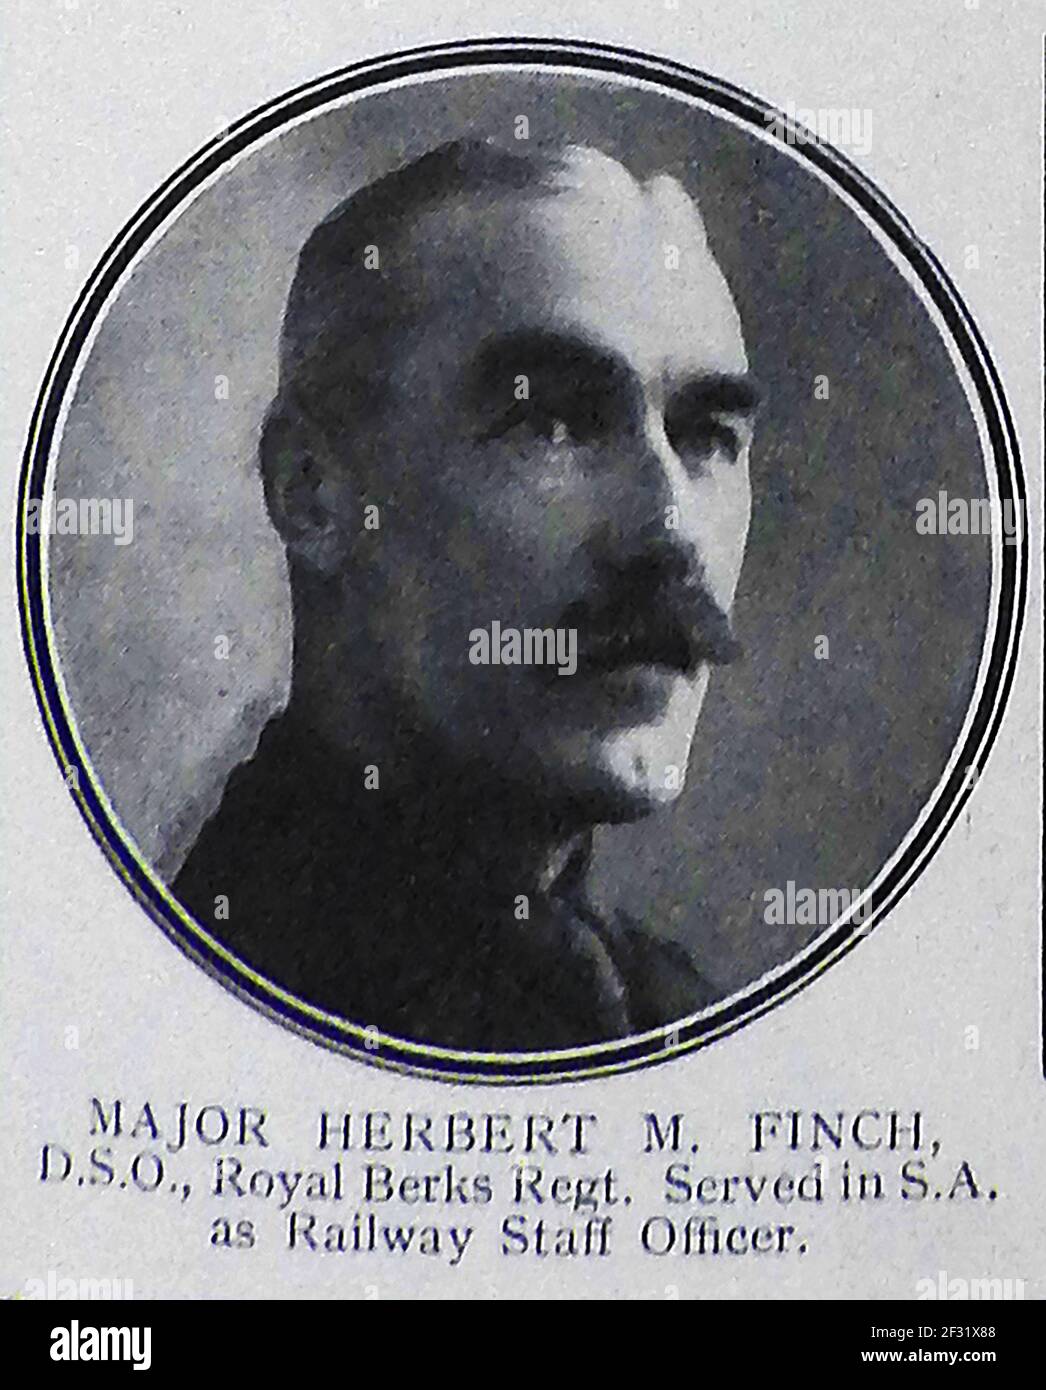 MAJOR HERBERT M FINCH.  D S O.  of the Royal Berkshire Regiment, South African Railway Staff Officer - A printed portrait from a1914-1915 role of honour page of those killed in action in World War One. Stock Photo